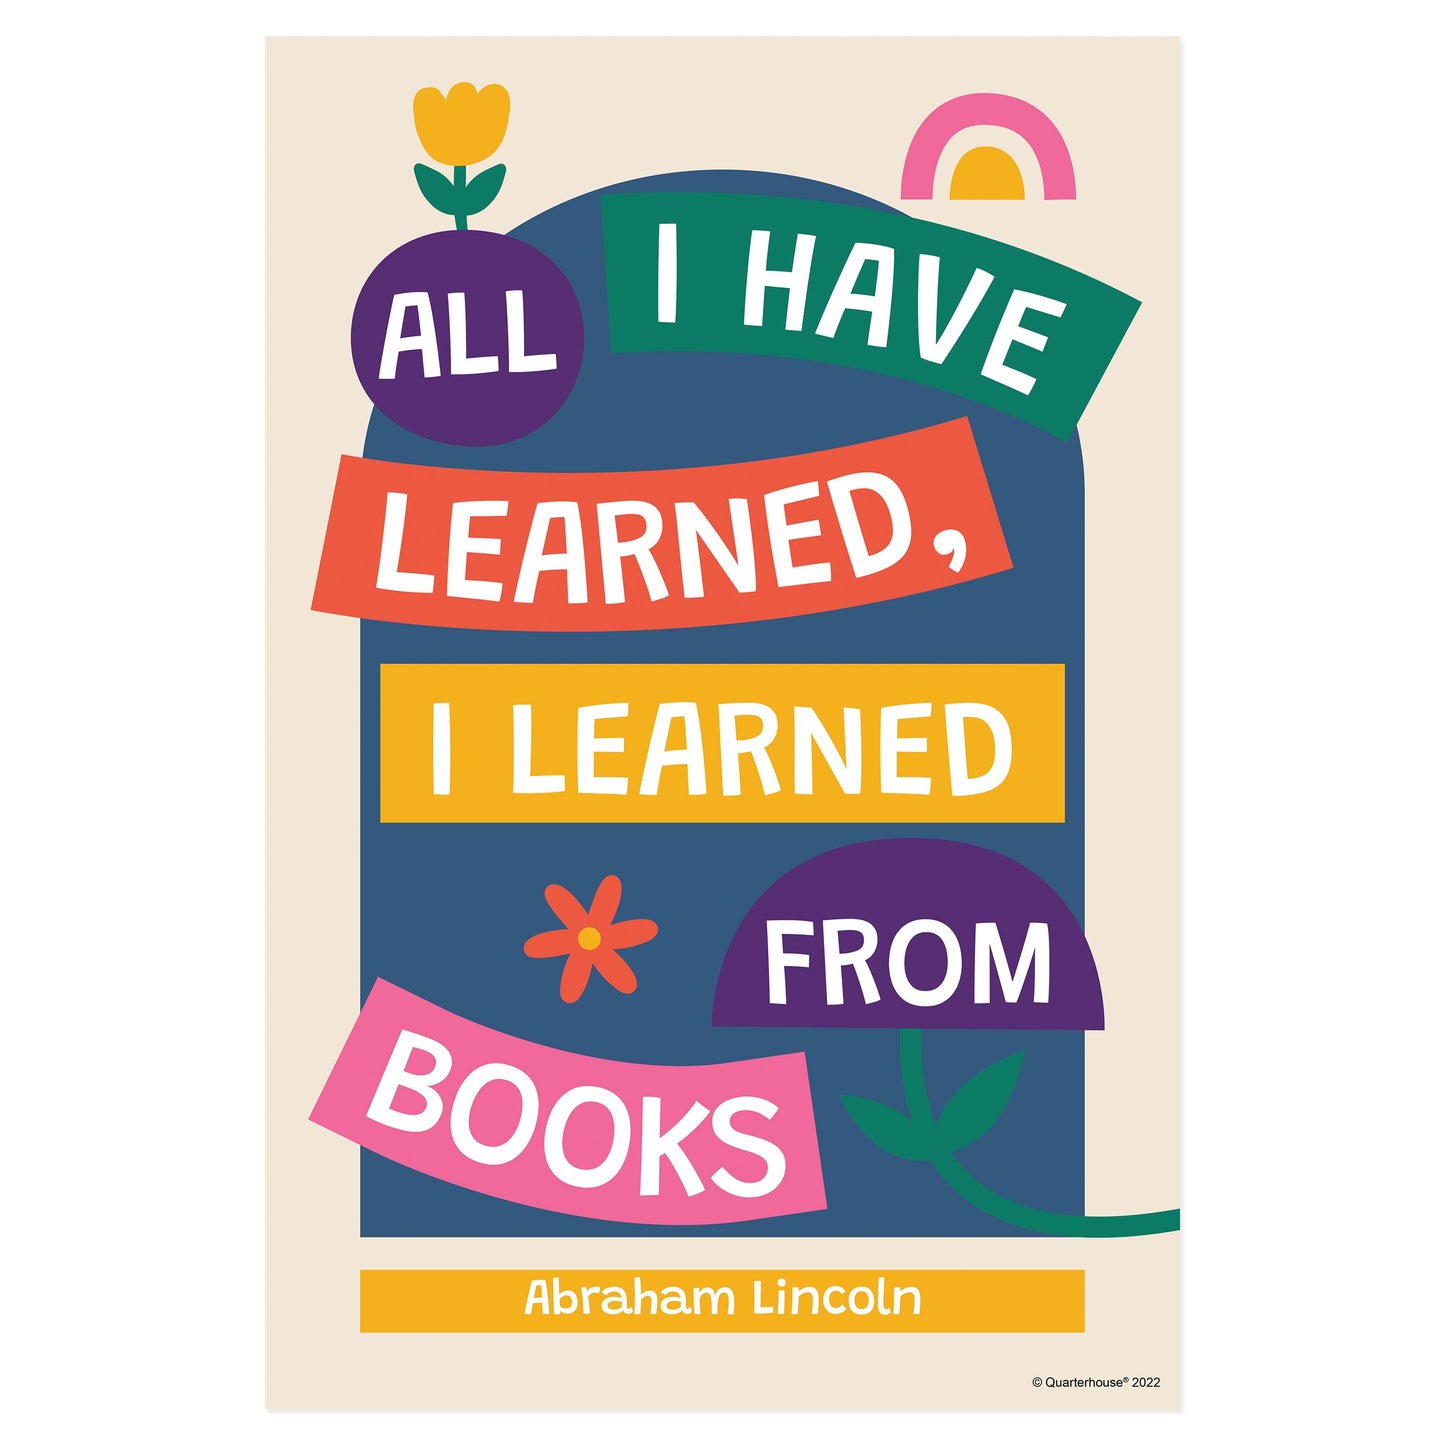 Quarterhouse Reading is Fun Quotes - Abraham Lincoln Poster, English-Language Arts Classroom Materials for Teachers